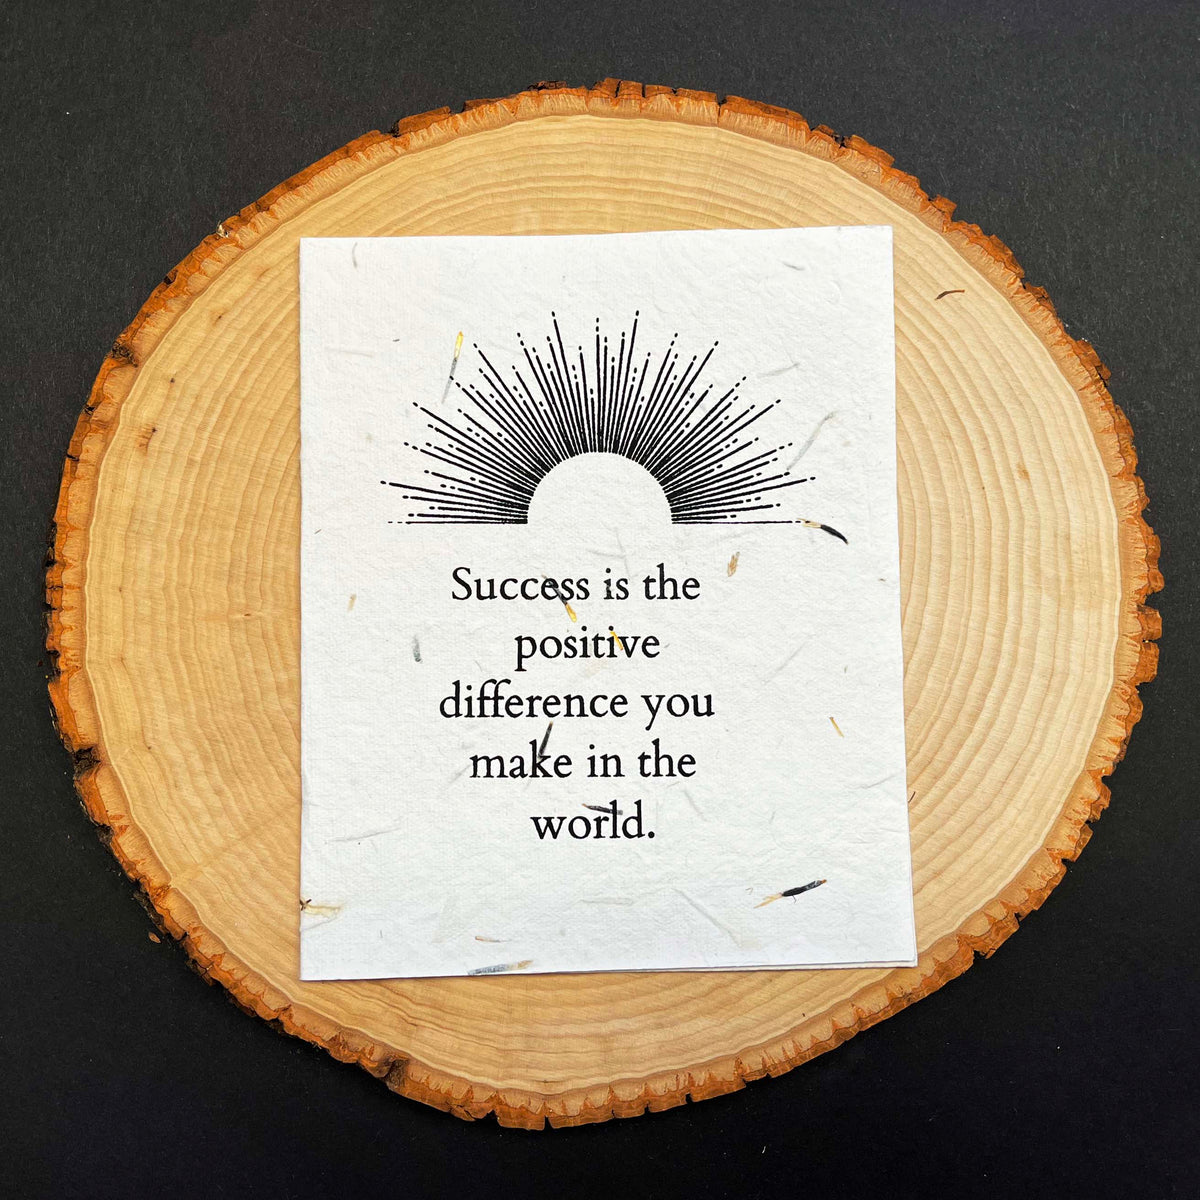 Success is the positive difference